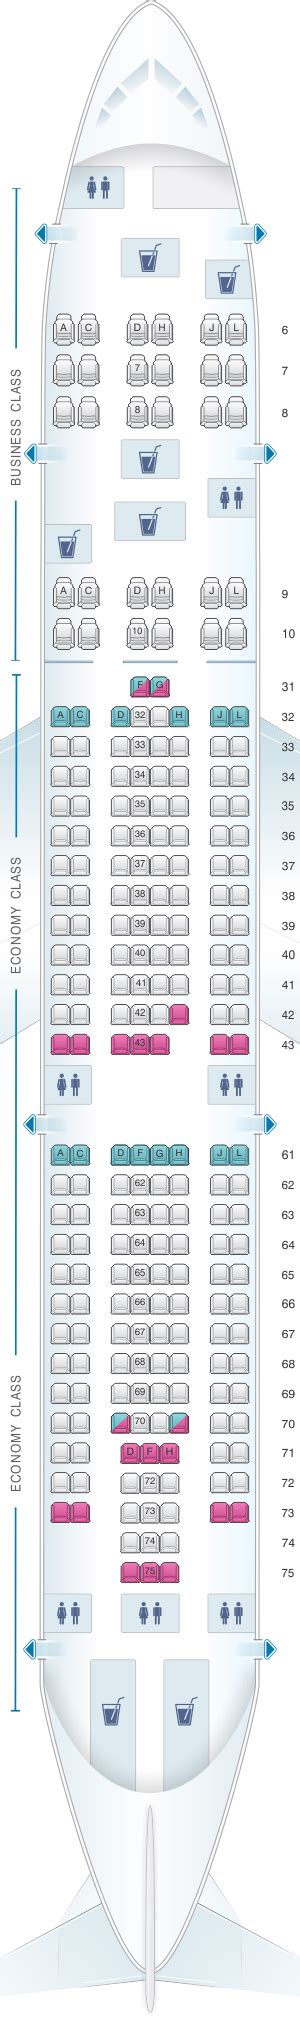 Seat Map China Eastern Airlines Airbus A330 200 Config2 Seatmaestro